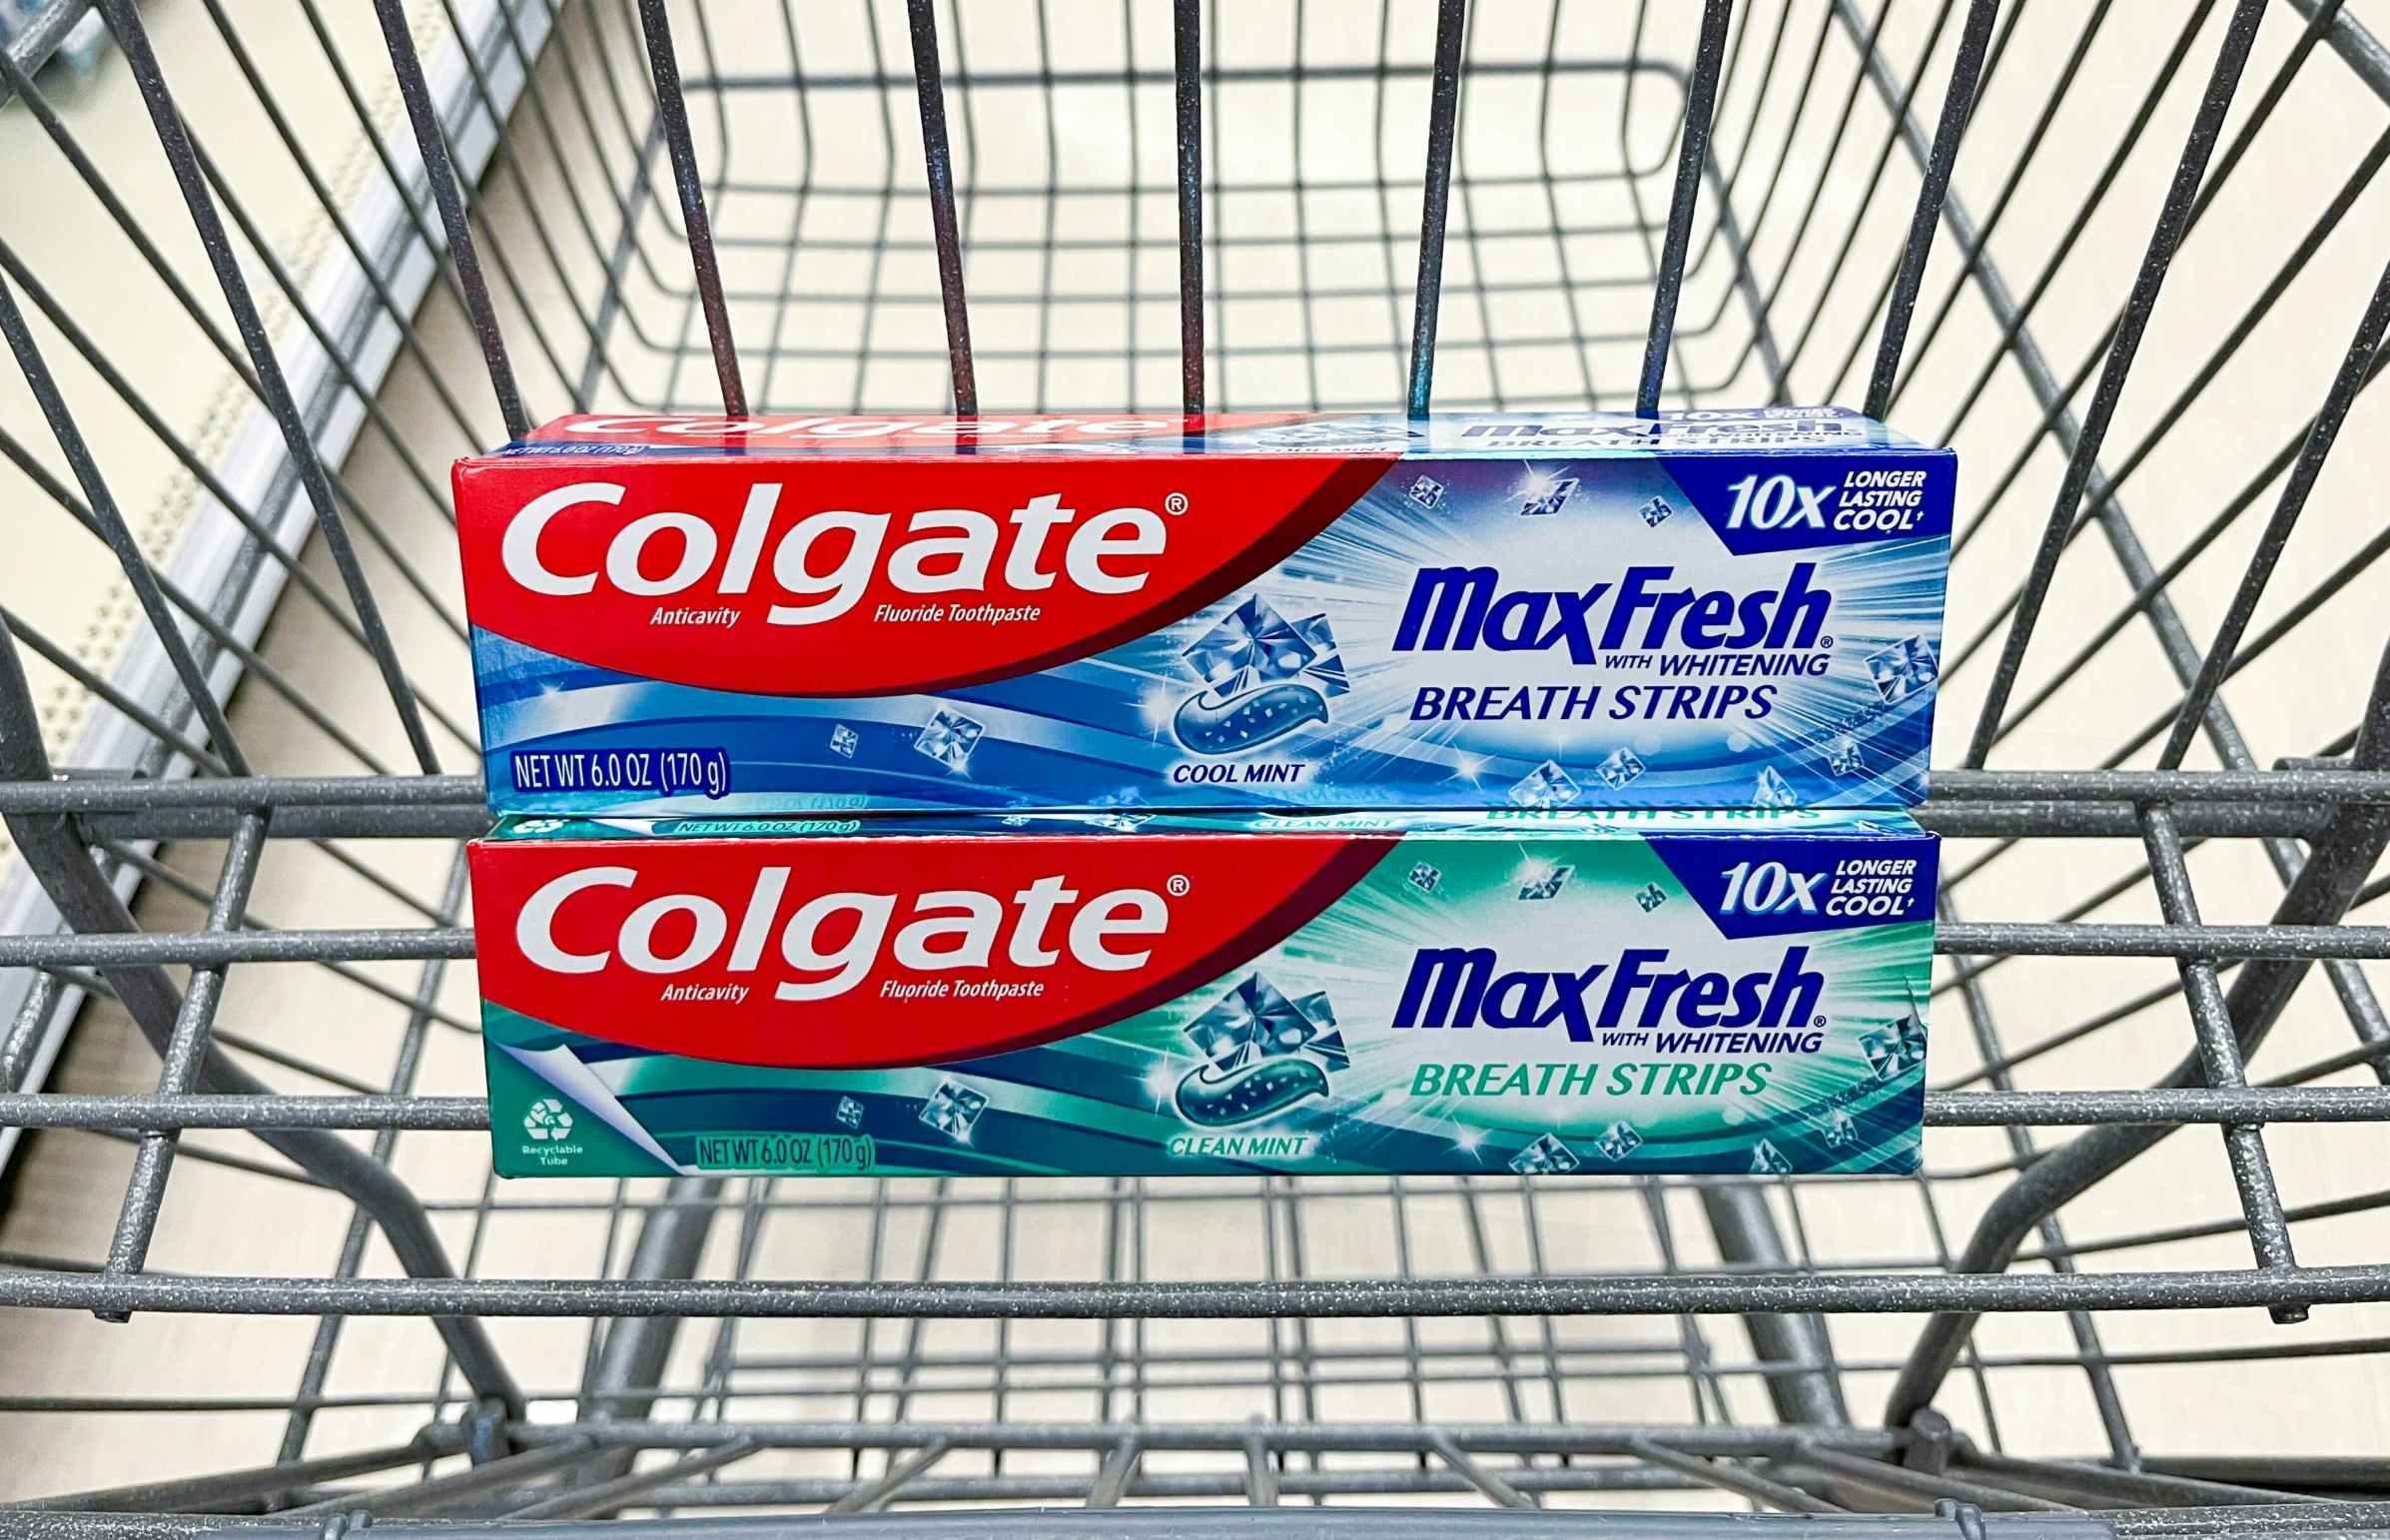 Two boxes of Colgate MaxFresh toothpaste stacked in a Walgreens shopping cart basket.